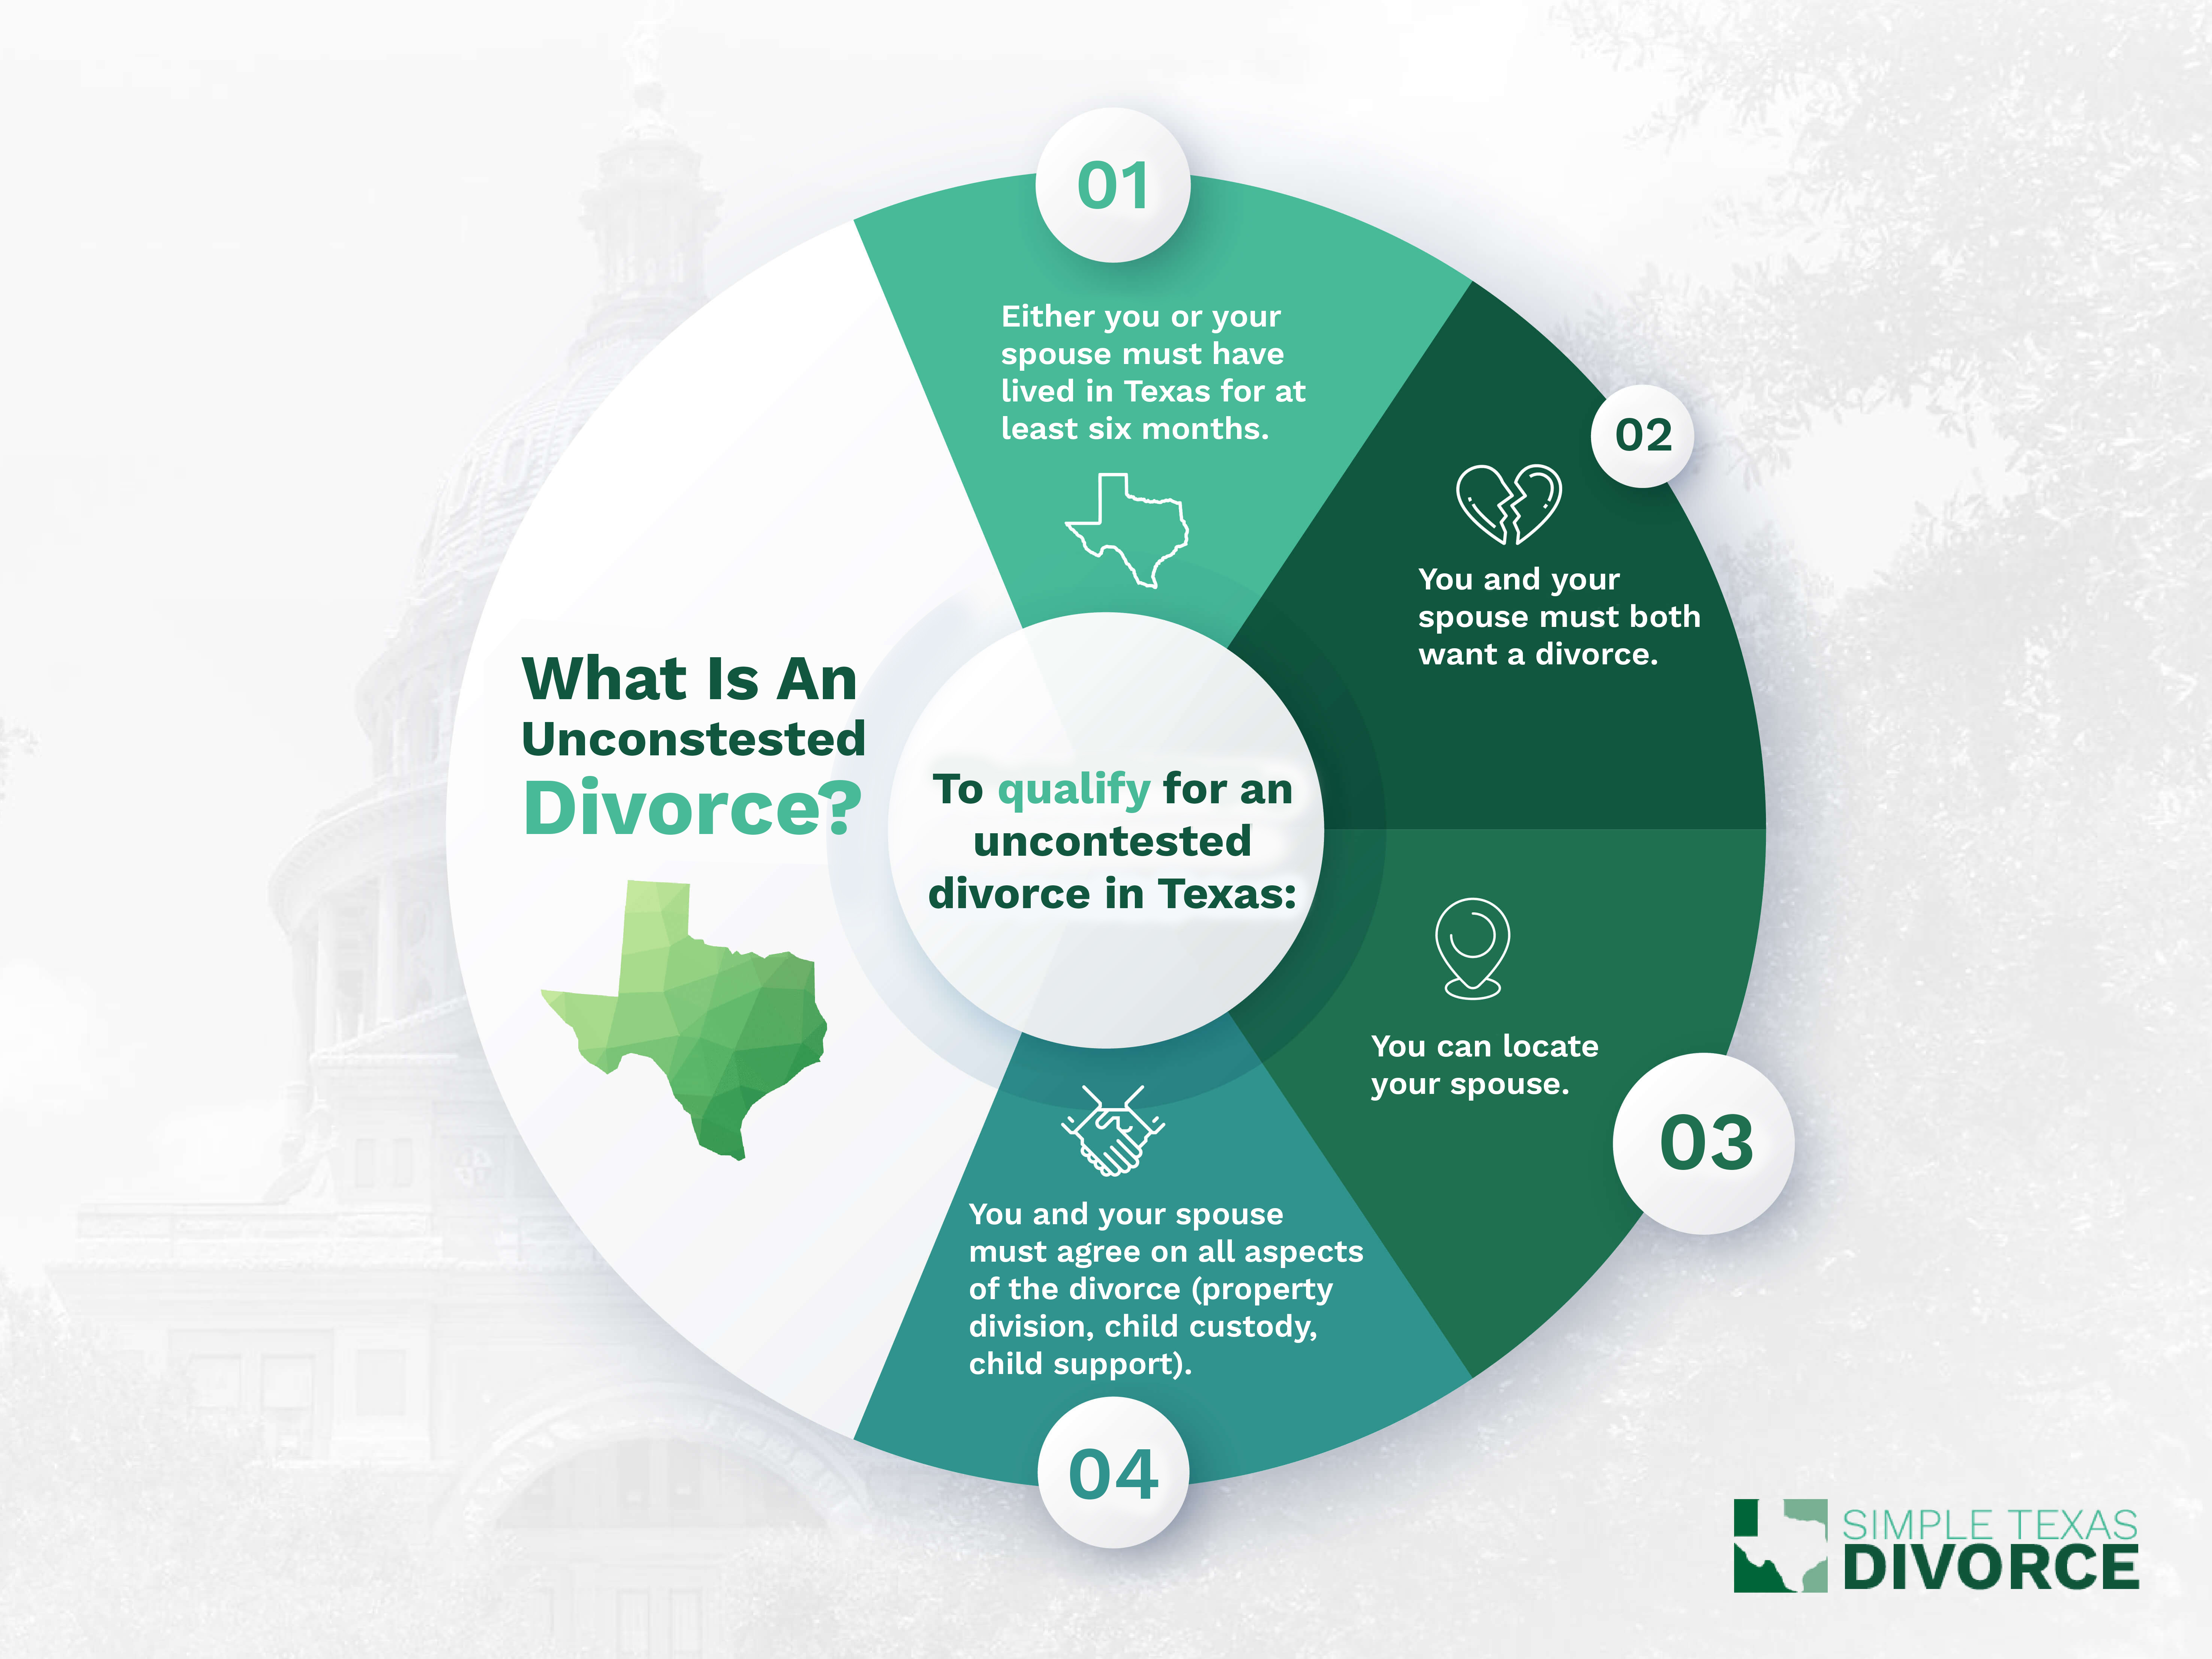 What is an uncontested divorce in Texas?